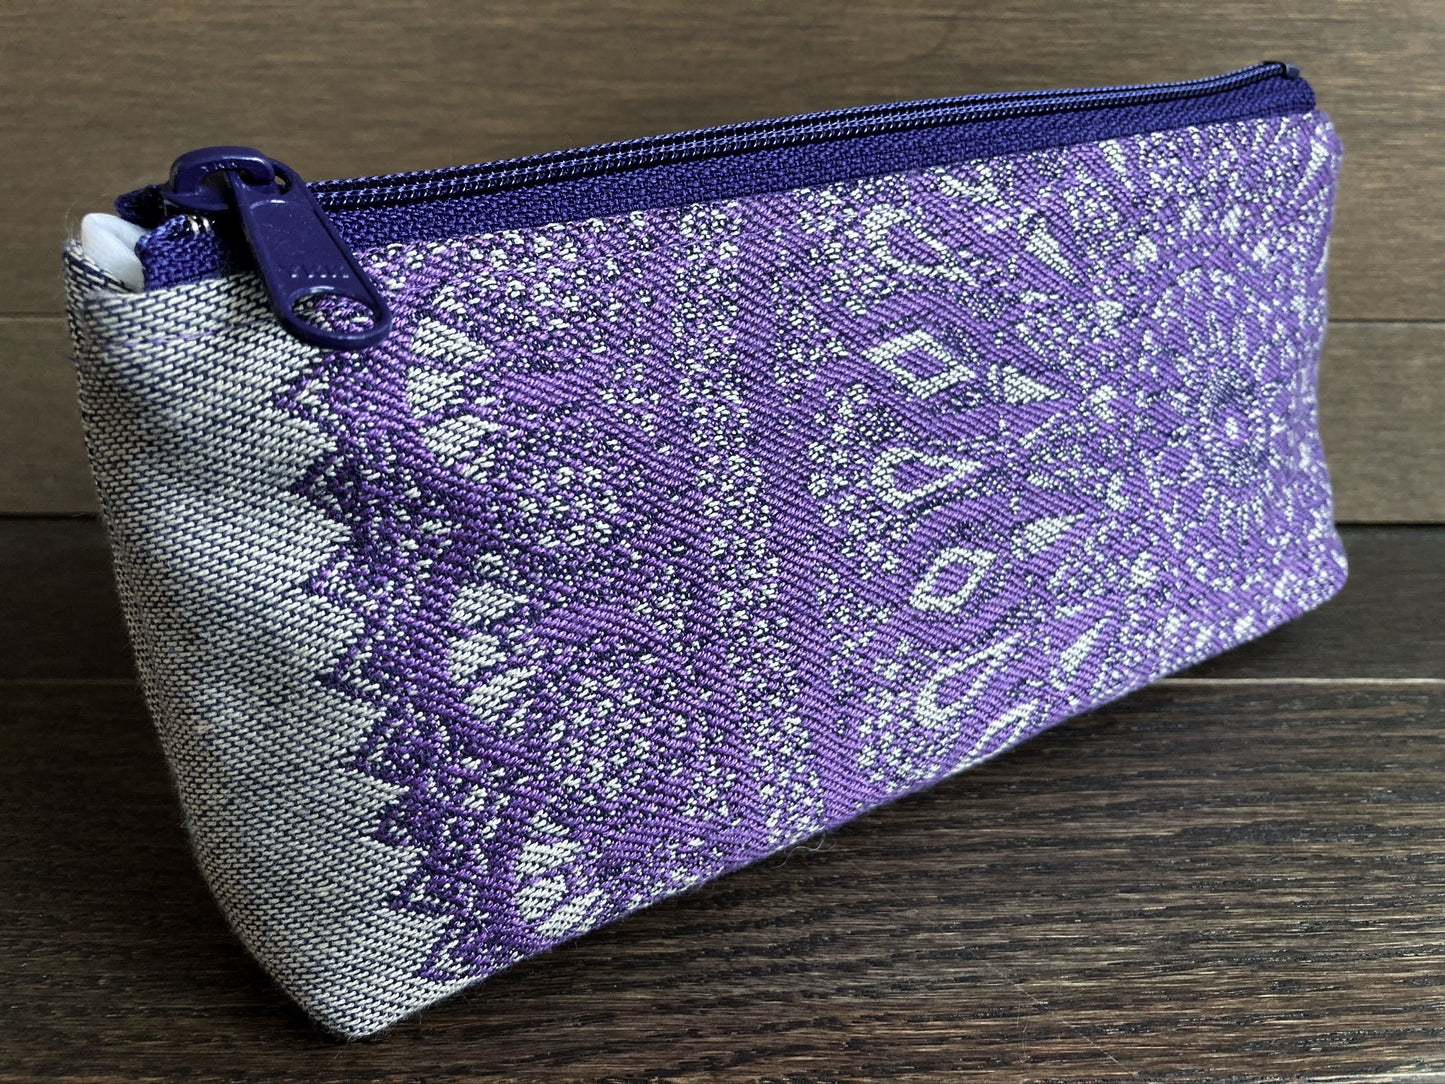 Purple and Silver Lace Jacquard & PUL Lined Compact Zipper Bag